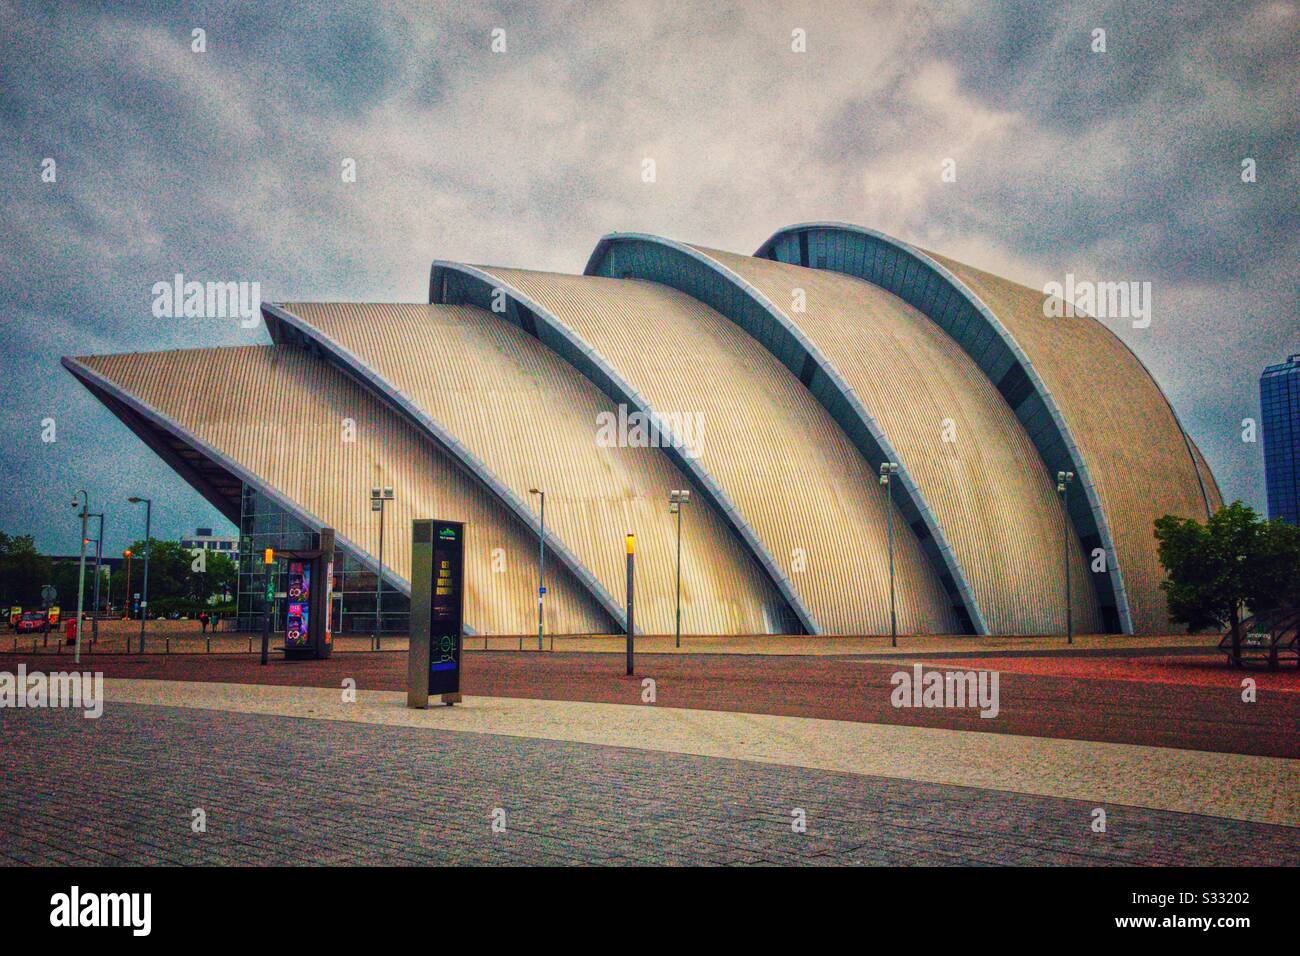 Clyde Auditorium (Armadillo) on the River Clyde in Glasgow, Scotland. Stock Photo